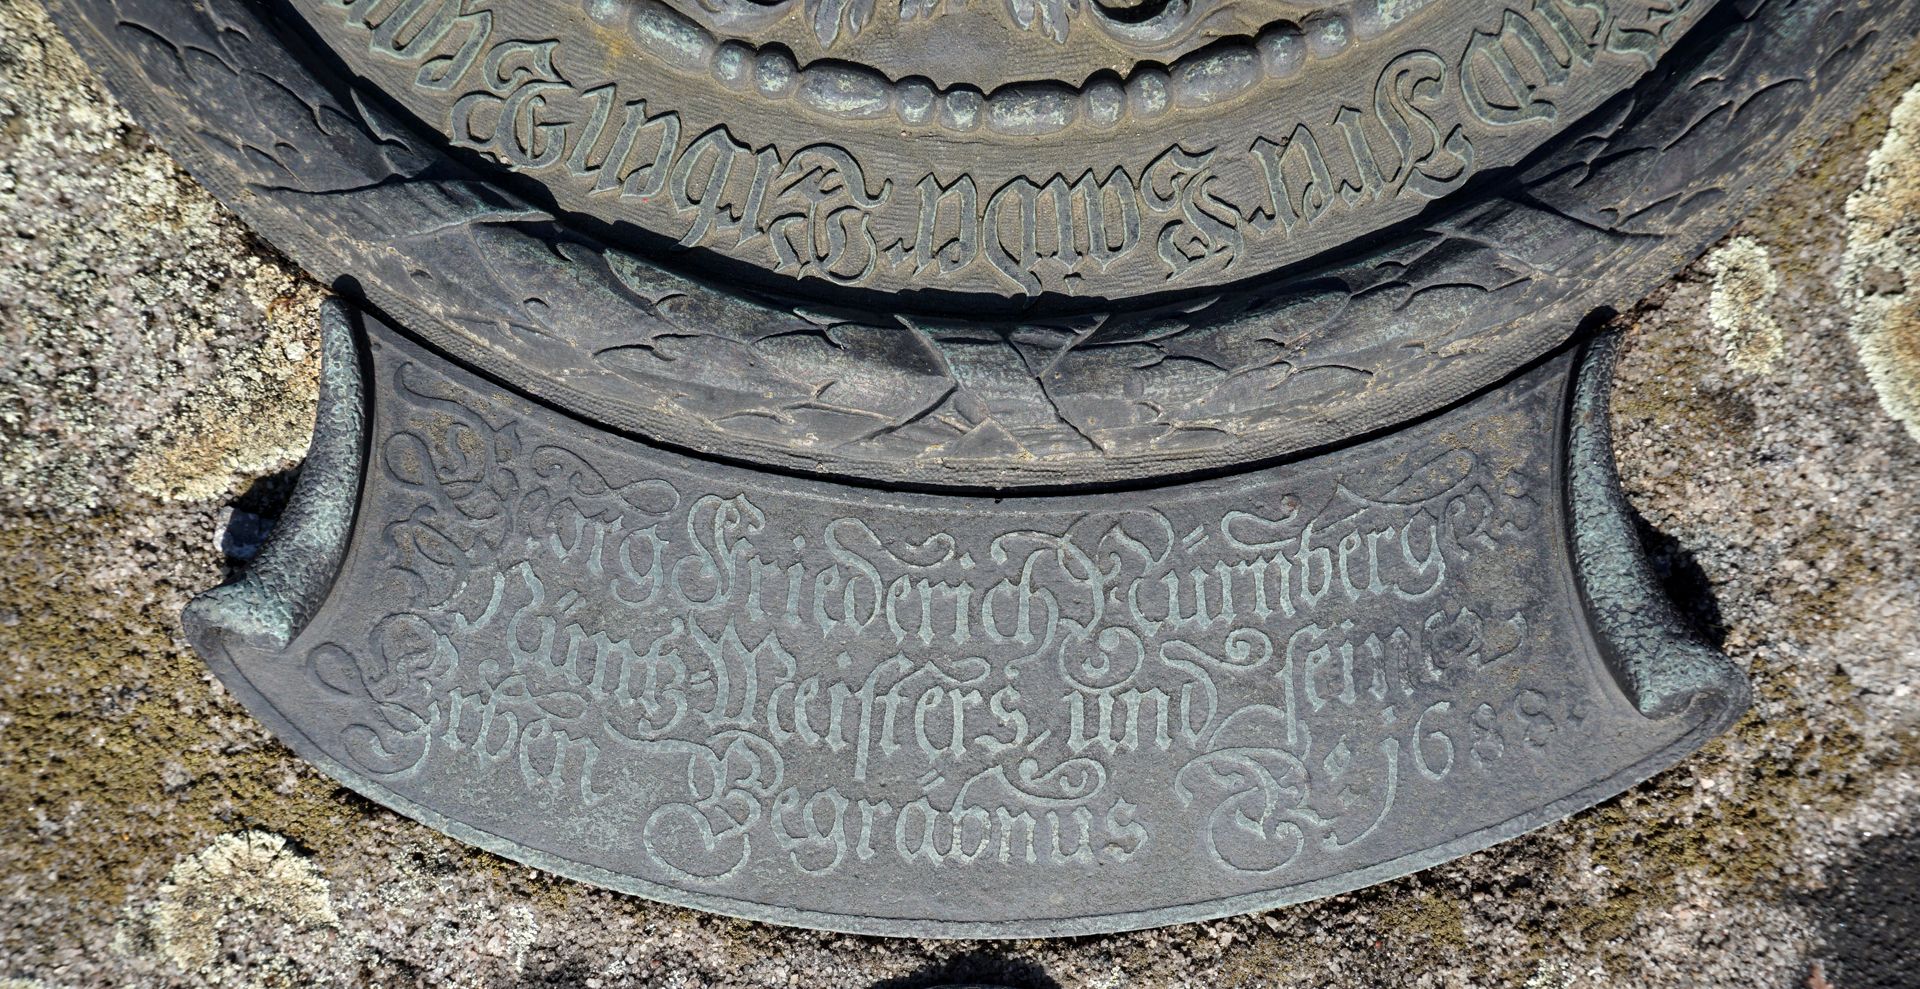 St. John's cemetery grave 1446 Georg Friederich Nürnberger Mint=Master, and his heirs gravesite (1688)